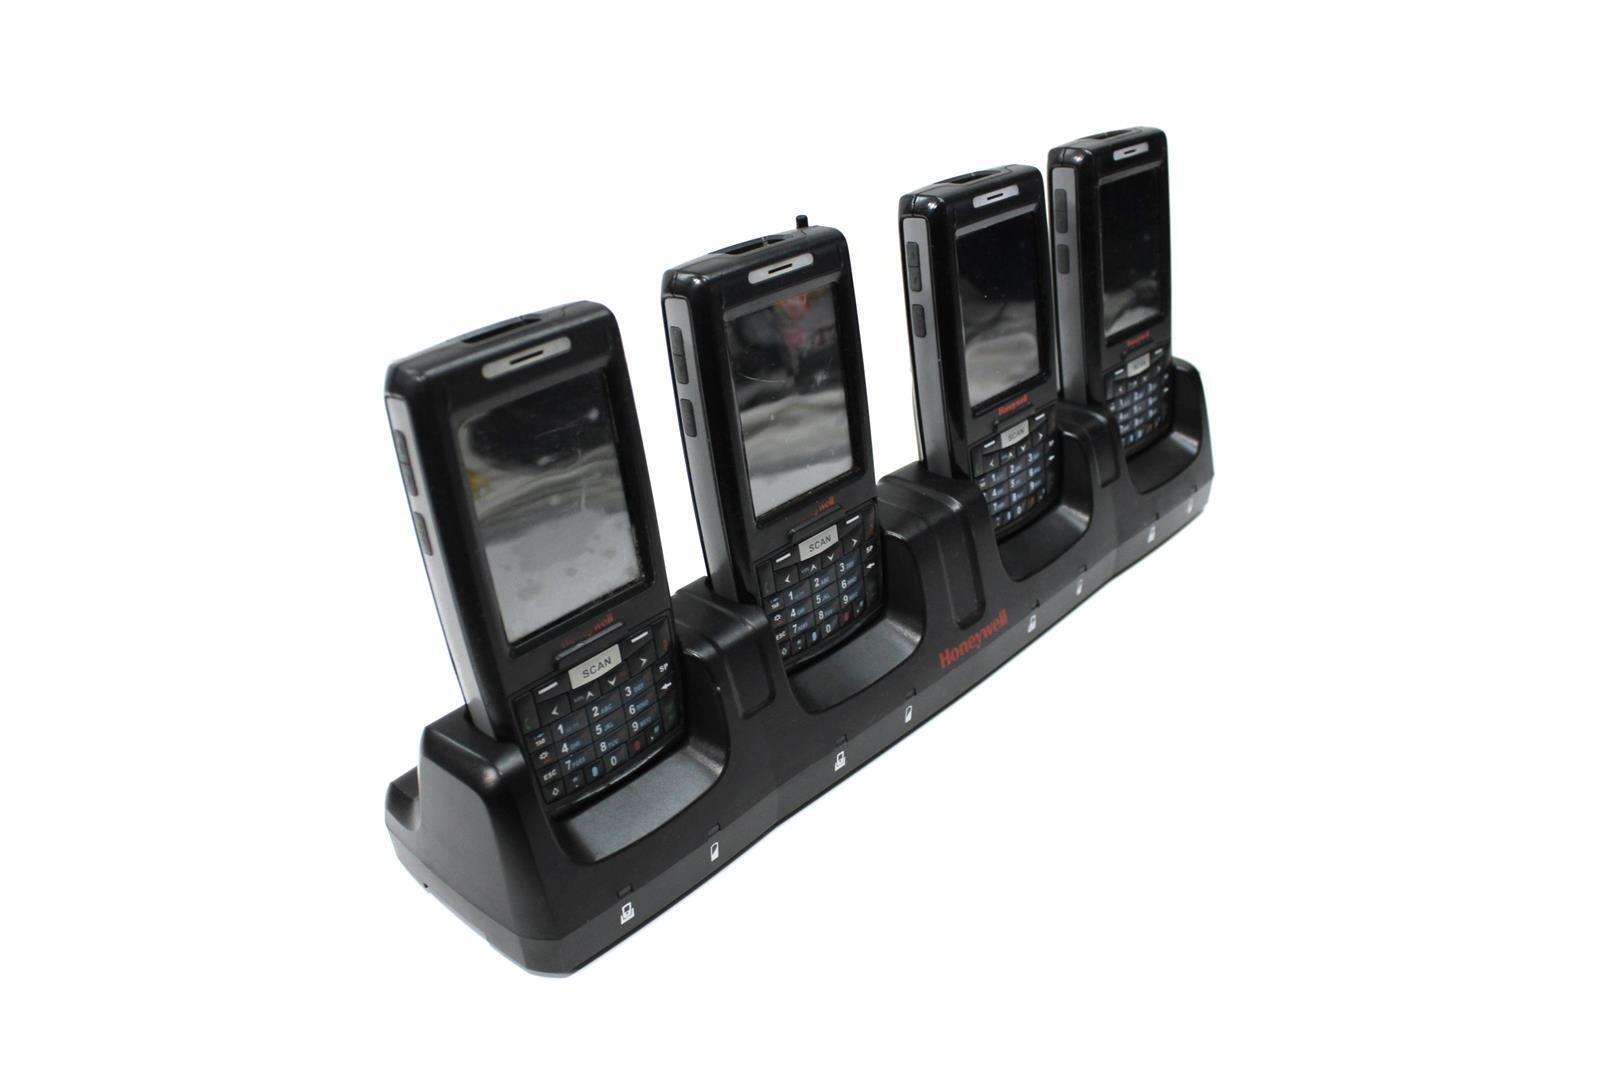 4x Honeywell Dolphin 7800L0 Computers | Includes 1x 7800-CB Charging Cradle